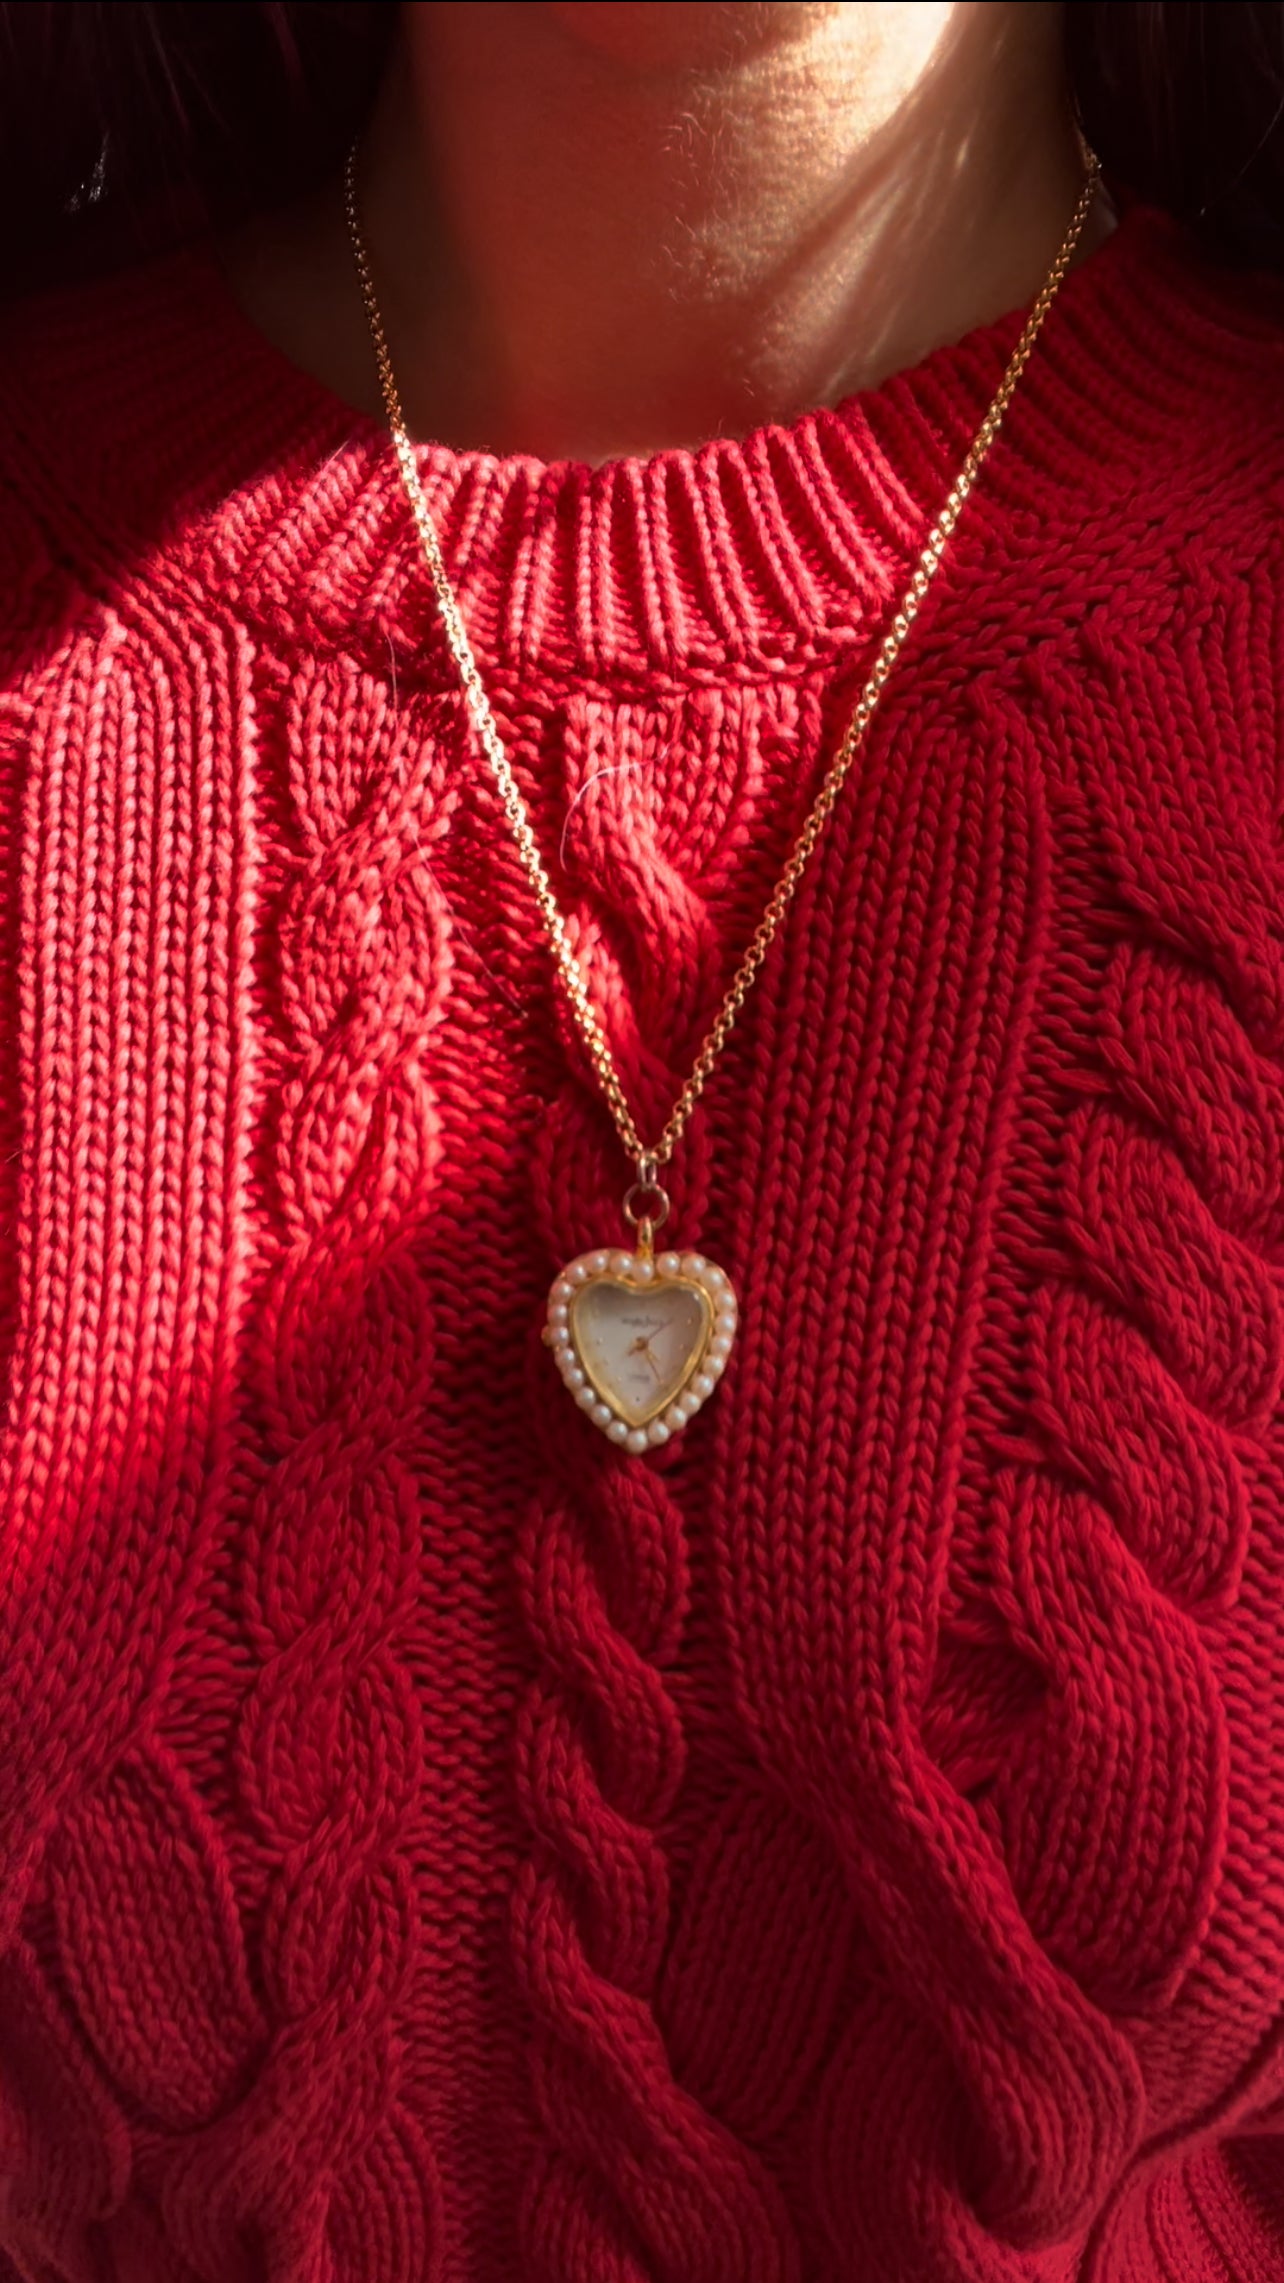 Gold Watch Heart Necklace